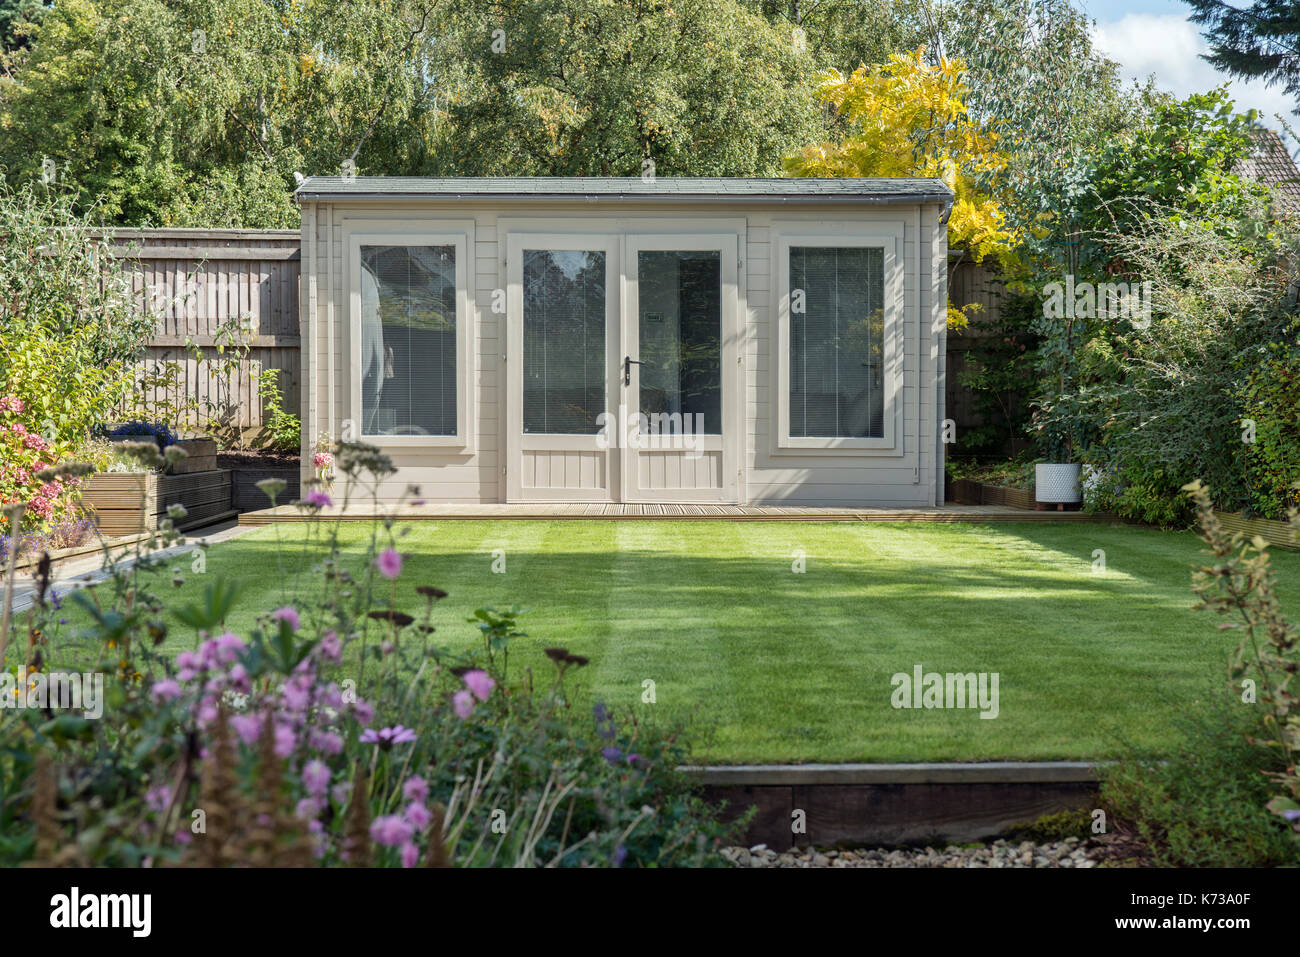 A modern summerhouse / shed in a very well manicured domestic garden Stock Photo